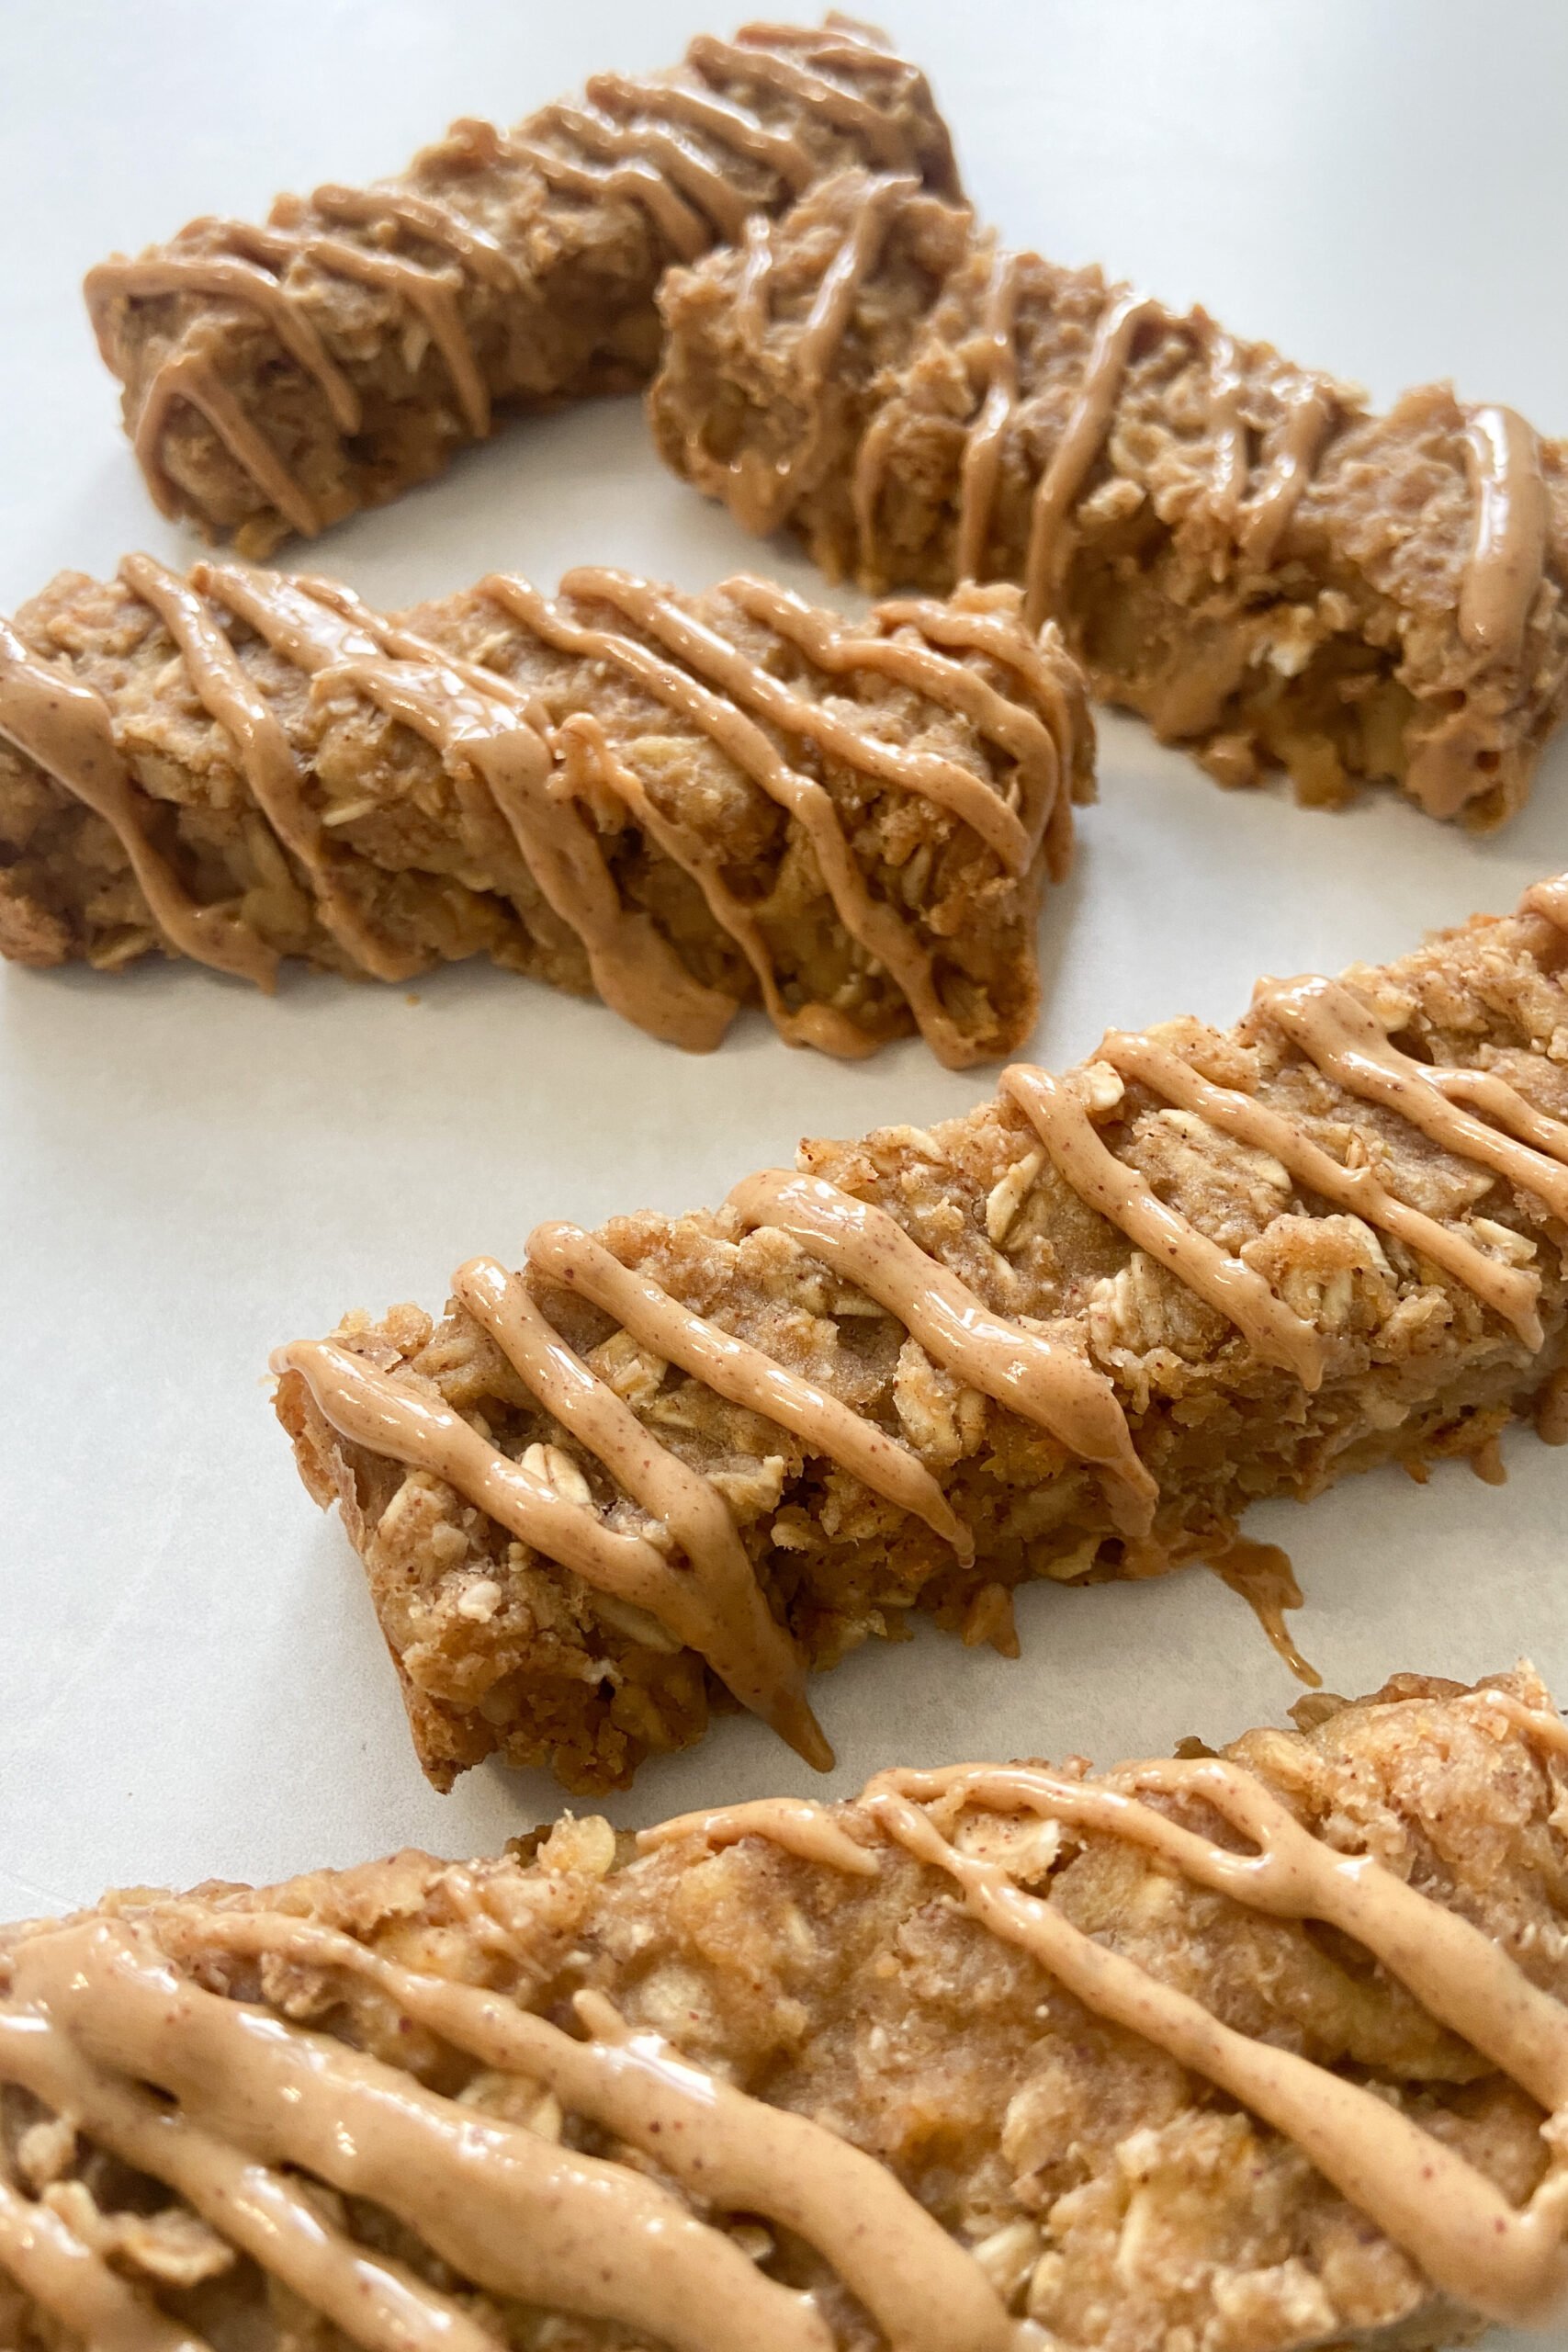 Apple oatmeal bars with peanut butter drizzle